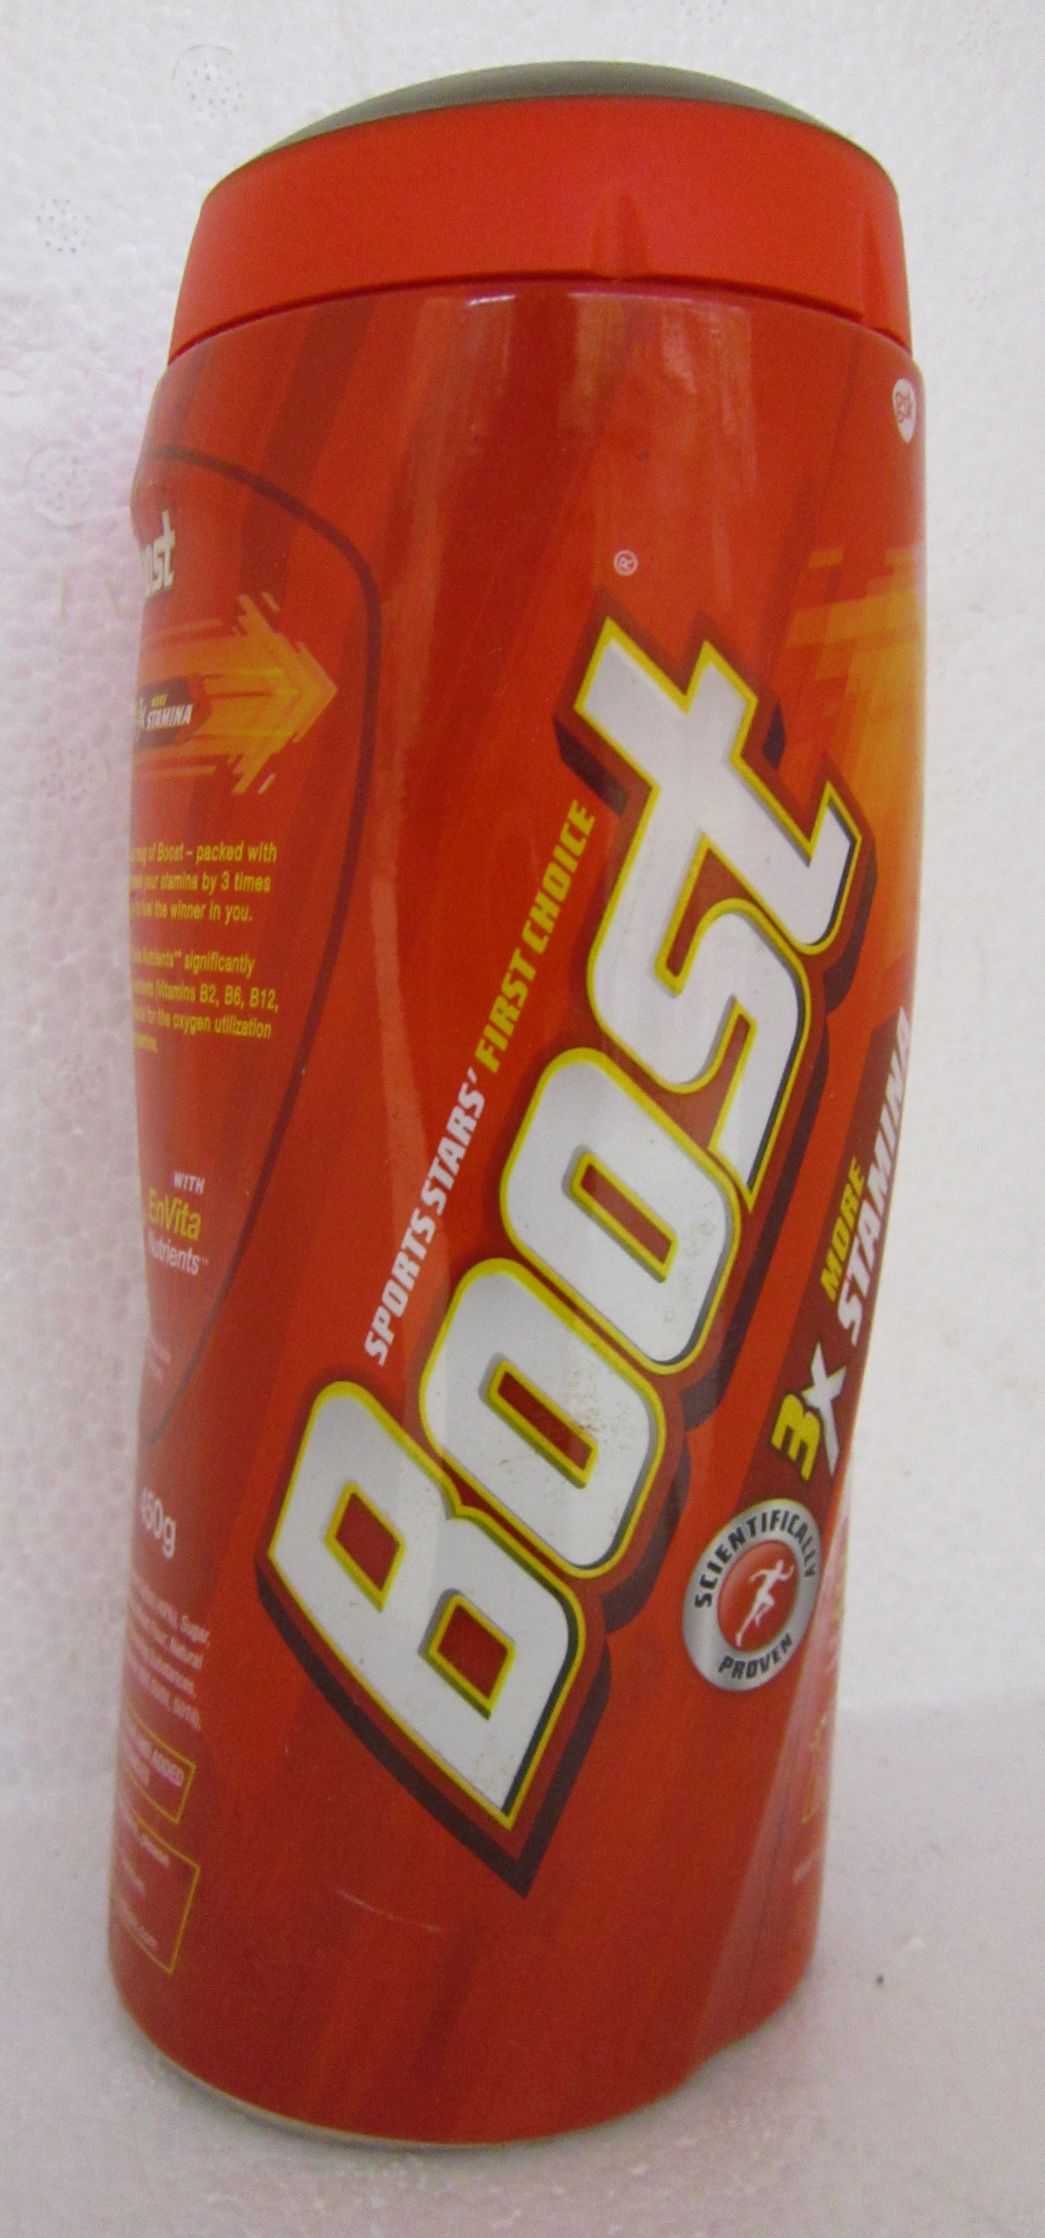 Boost Image